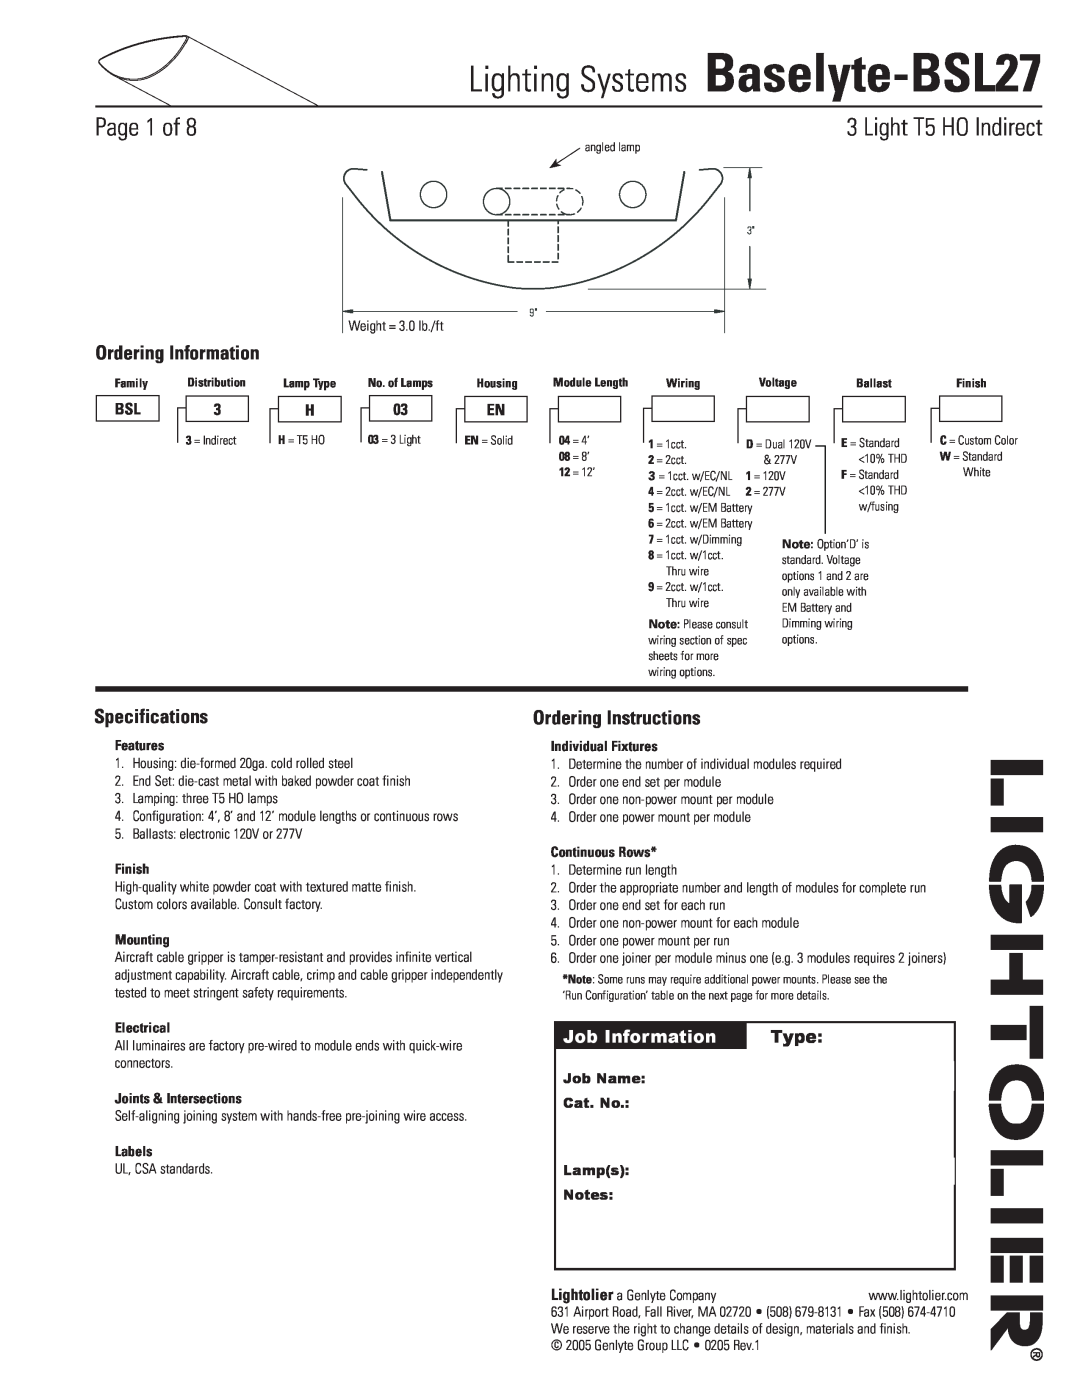 Lightolier specifications Lighting Systems Baselyte-BSL27, Page  of, Light T5 HO Indirect, Ordering Information, Type 